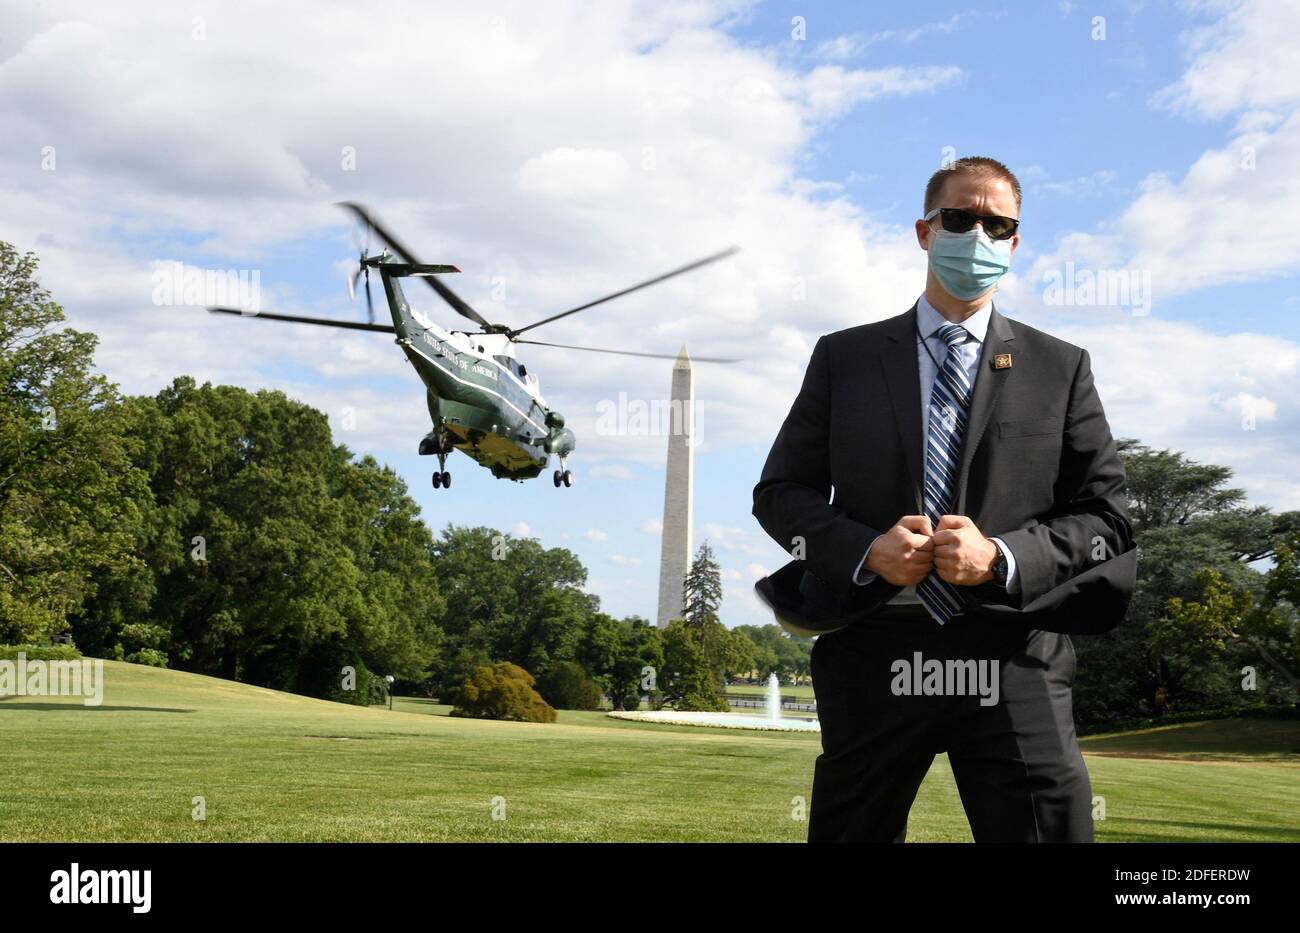 July 11, 2020 - Washington, DC - United States : A US Secret Service agent, wearing a mask to protect against COVID-19, stands on the South Lawn as Marine One lifts off with President Donald Trump, departing the White House for a visit to Walter Reed National Military Medical Center, in Bethesda Maryland. Photo by Mike Theiler/Pool/ABACAPRESS.COM Stock Photo